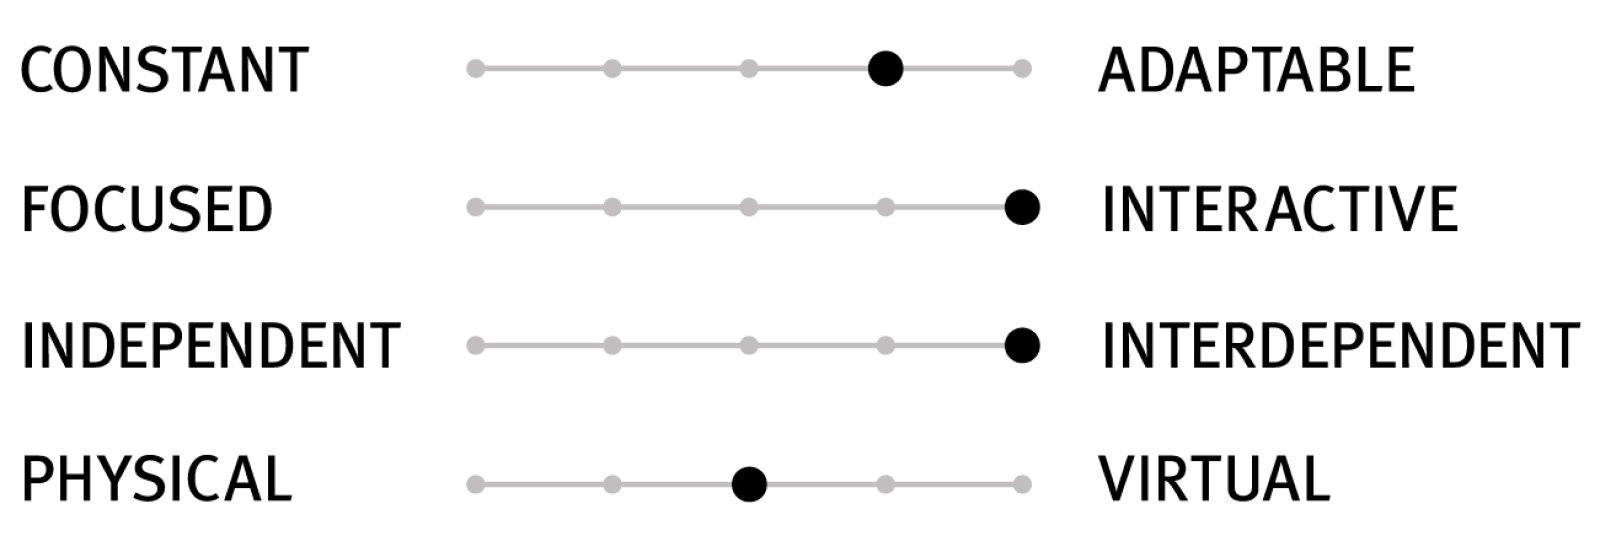 A scale with four sets of sliders that indicate the design characteristics of a setting. These sliders show moderate adaptability, high interactivity and interdependence, and a balance between supporting in-person and virtual team members.